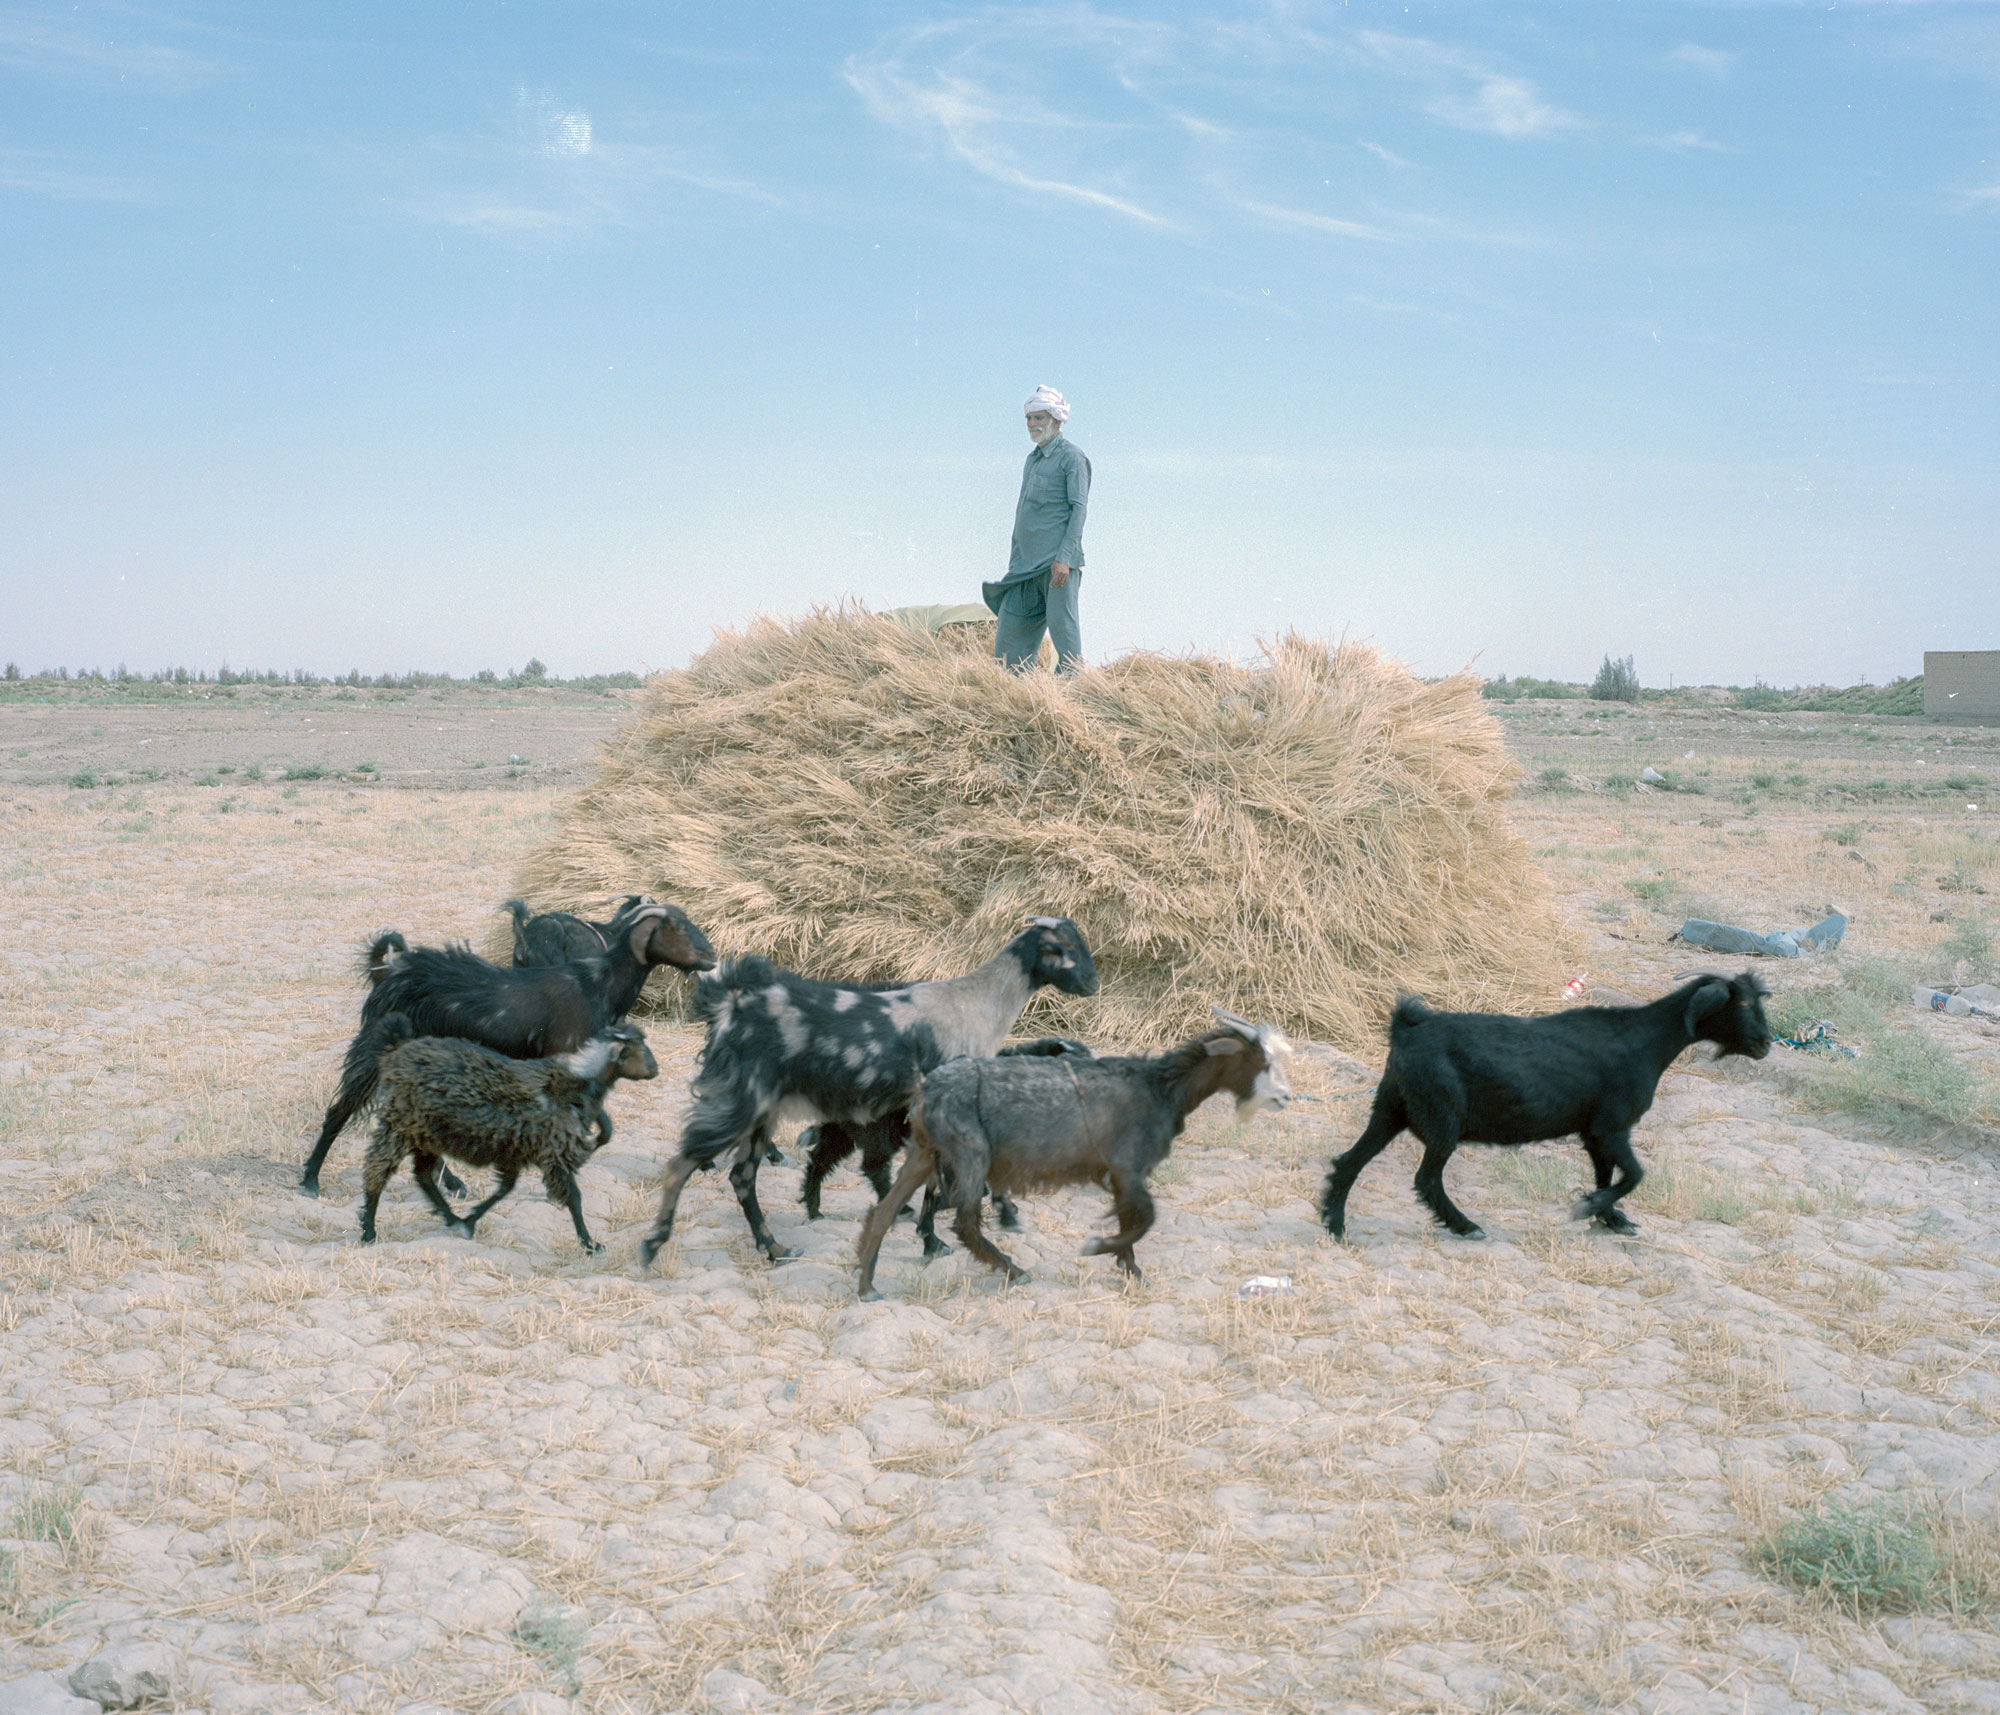 A man watches over the few sheep that remain after a severe drought.